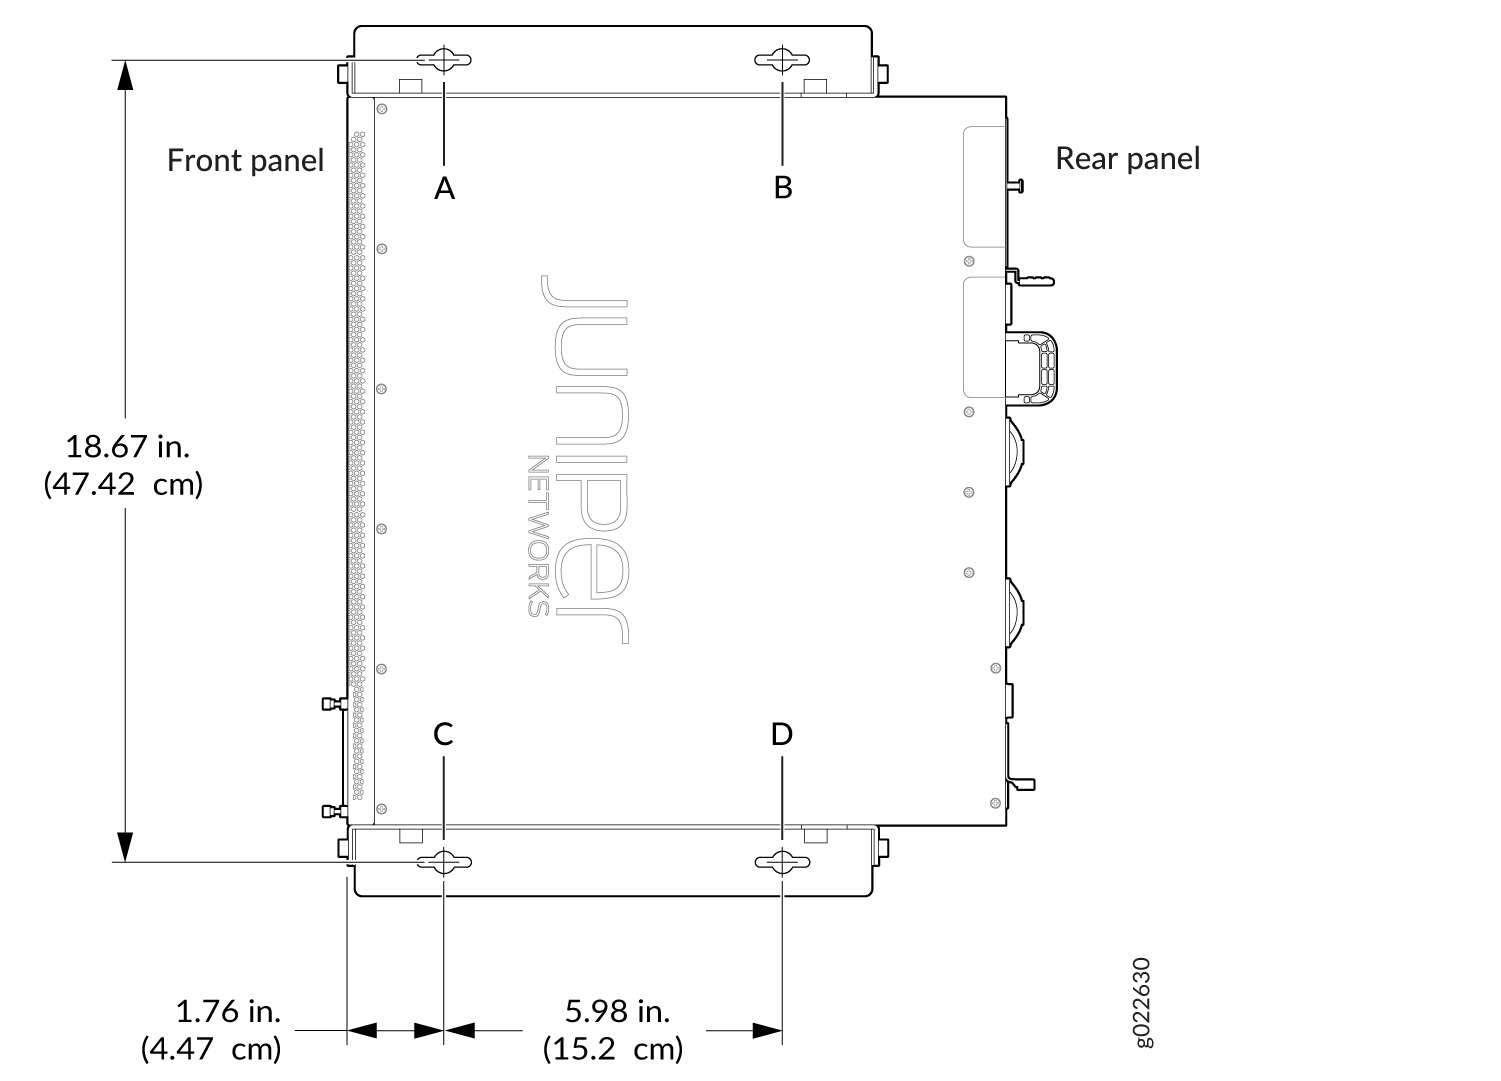 Measurements for Mounting an EX4400 Switch on a Wall